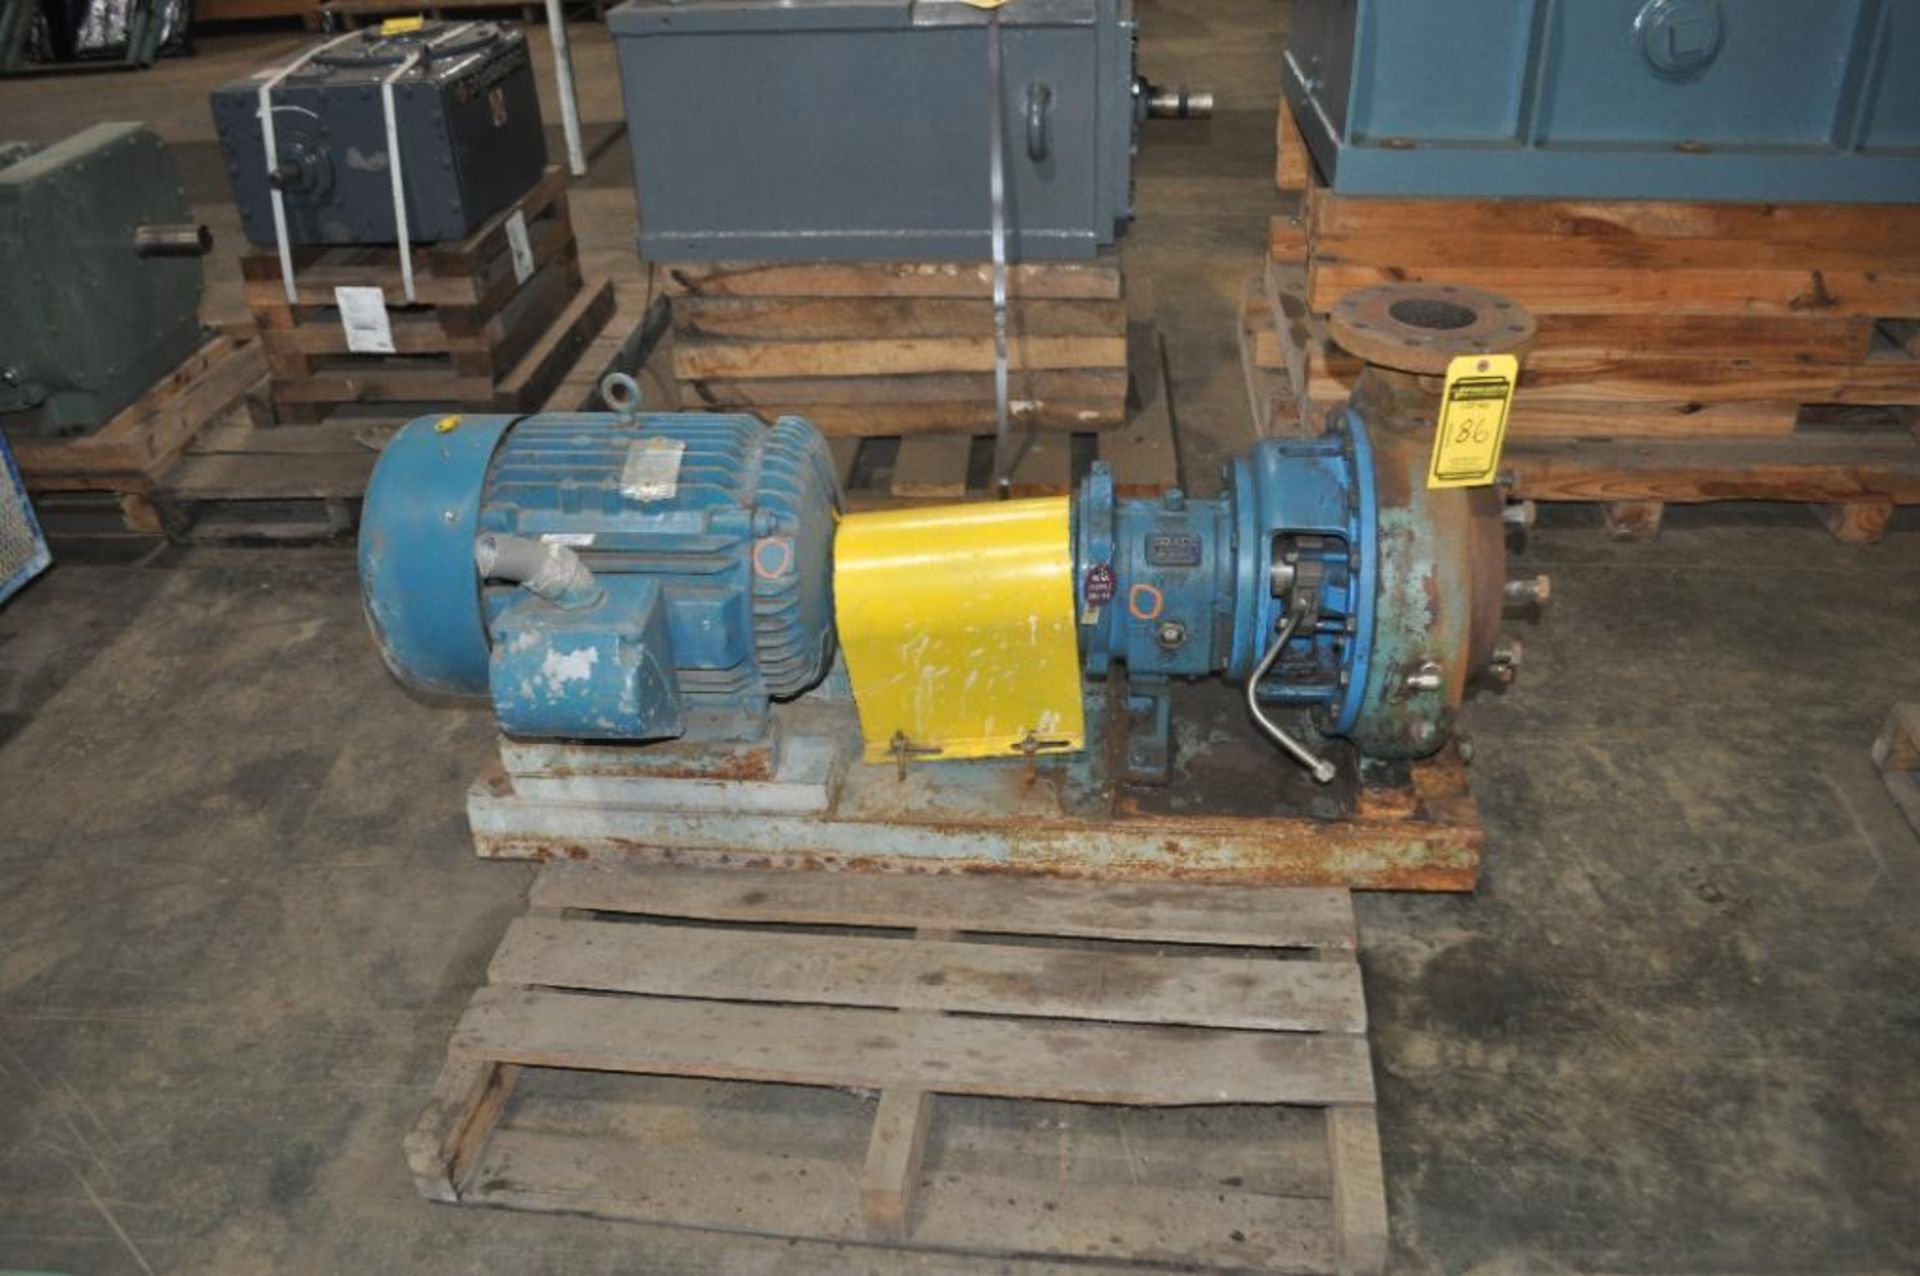 GOULDS 4'' X 6'' CENTRIFUGAL PUMP SKID, MODEL MTX 30 - Image 2 of 3